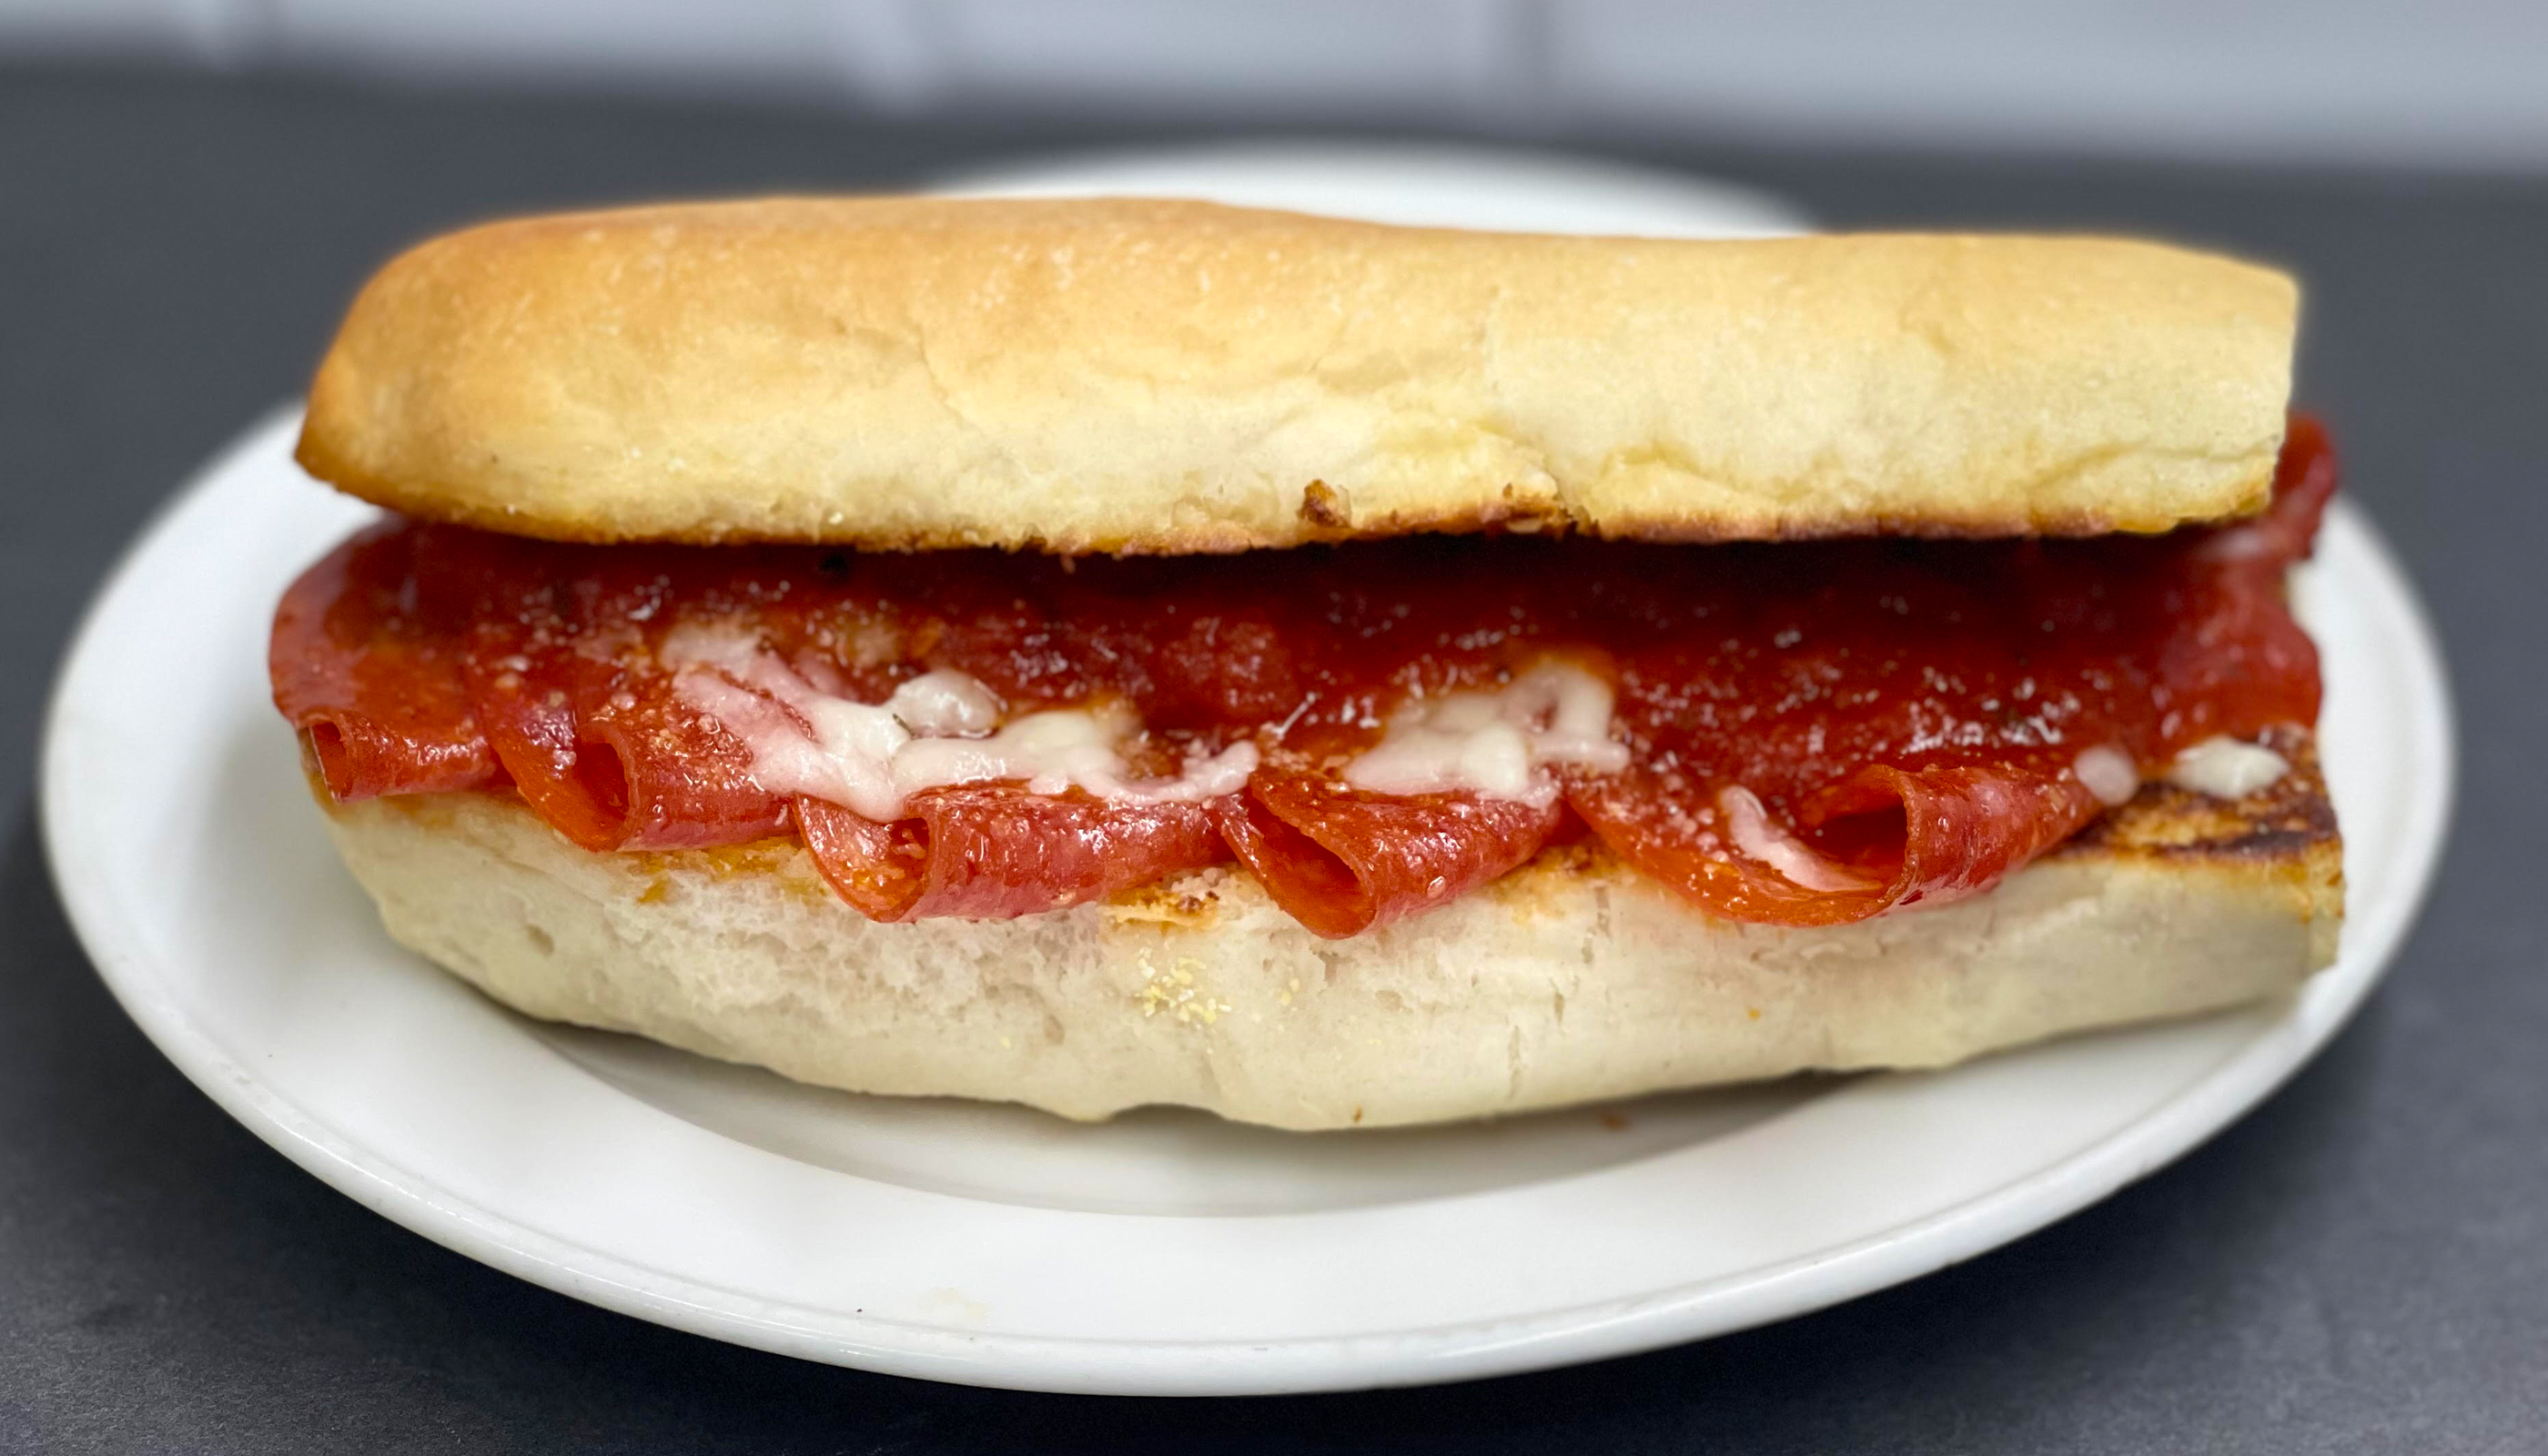 Pepperoni Sub loaded with cheese, delicious pepperoni, marinara on a house made sub roll.